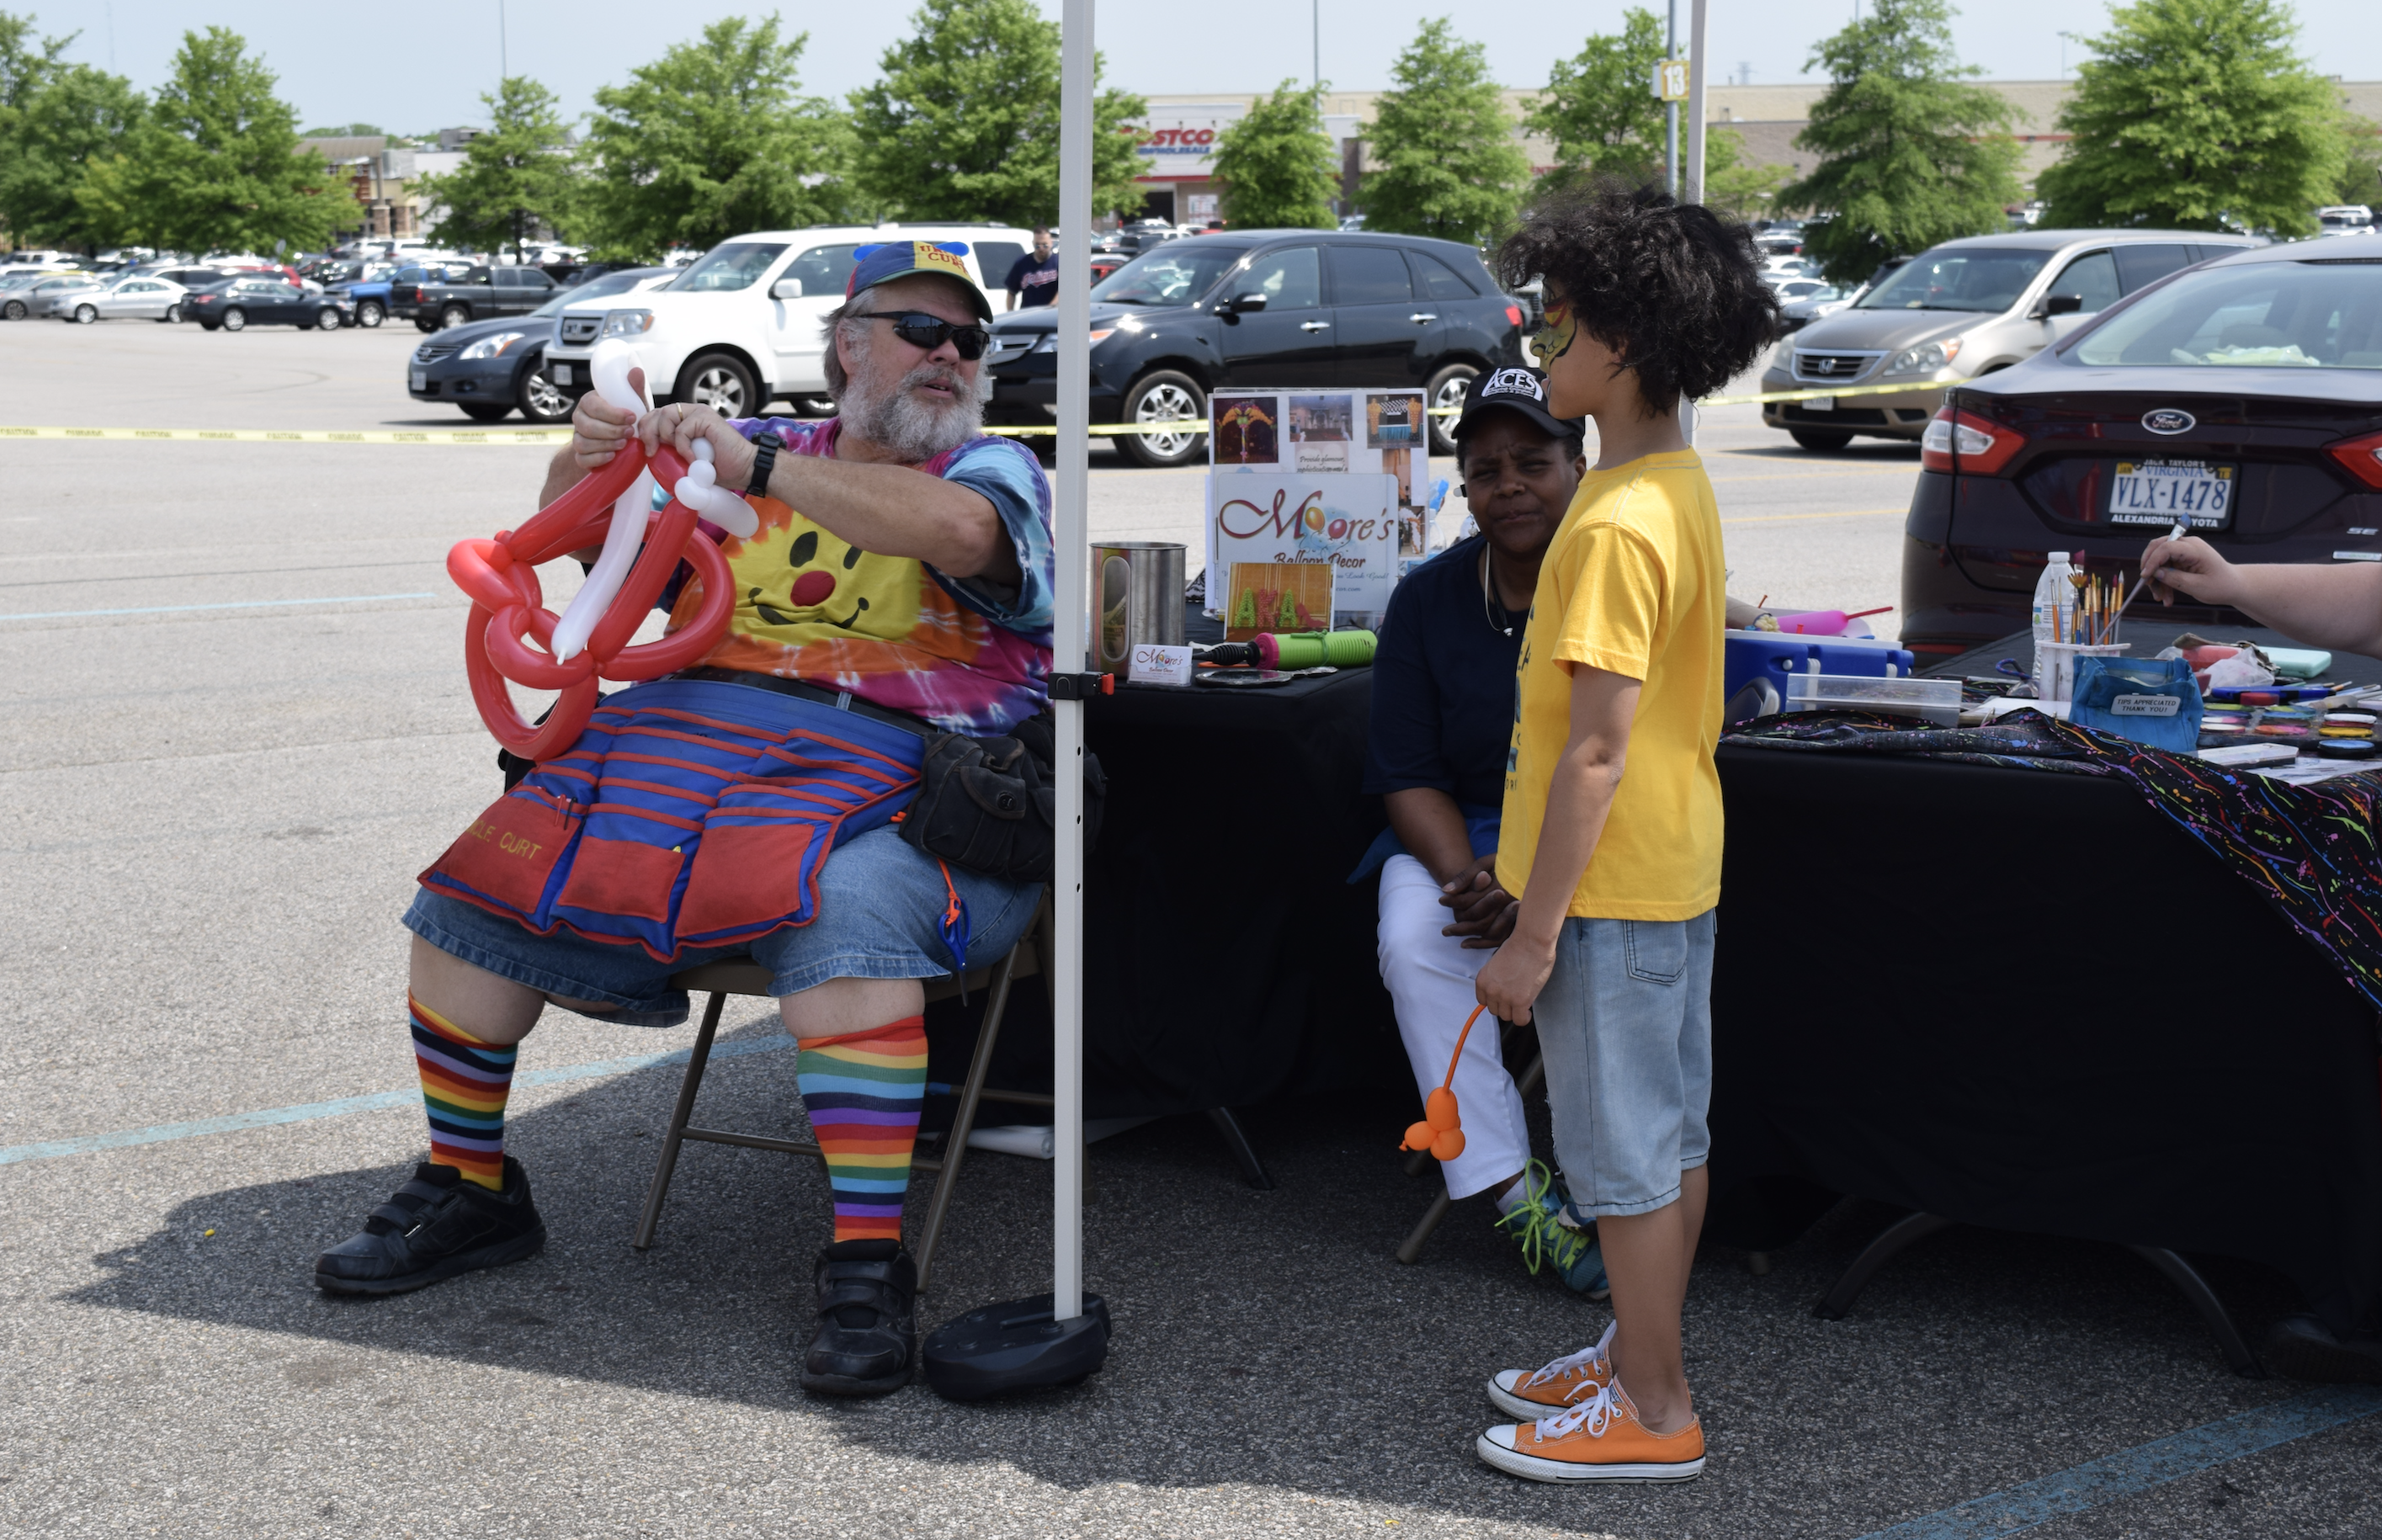 Kids can enjoy face painting and balloon artists will entertain them too at "The Market at Potomac Mills" in Woodbridge, Virginia- (held from late April to late October 2017)